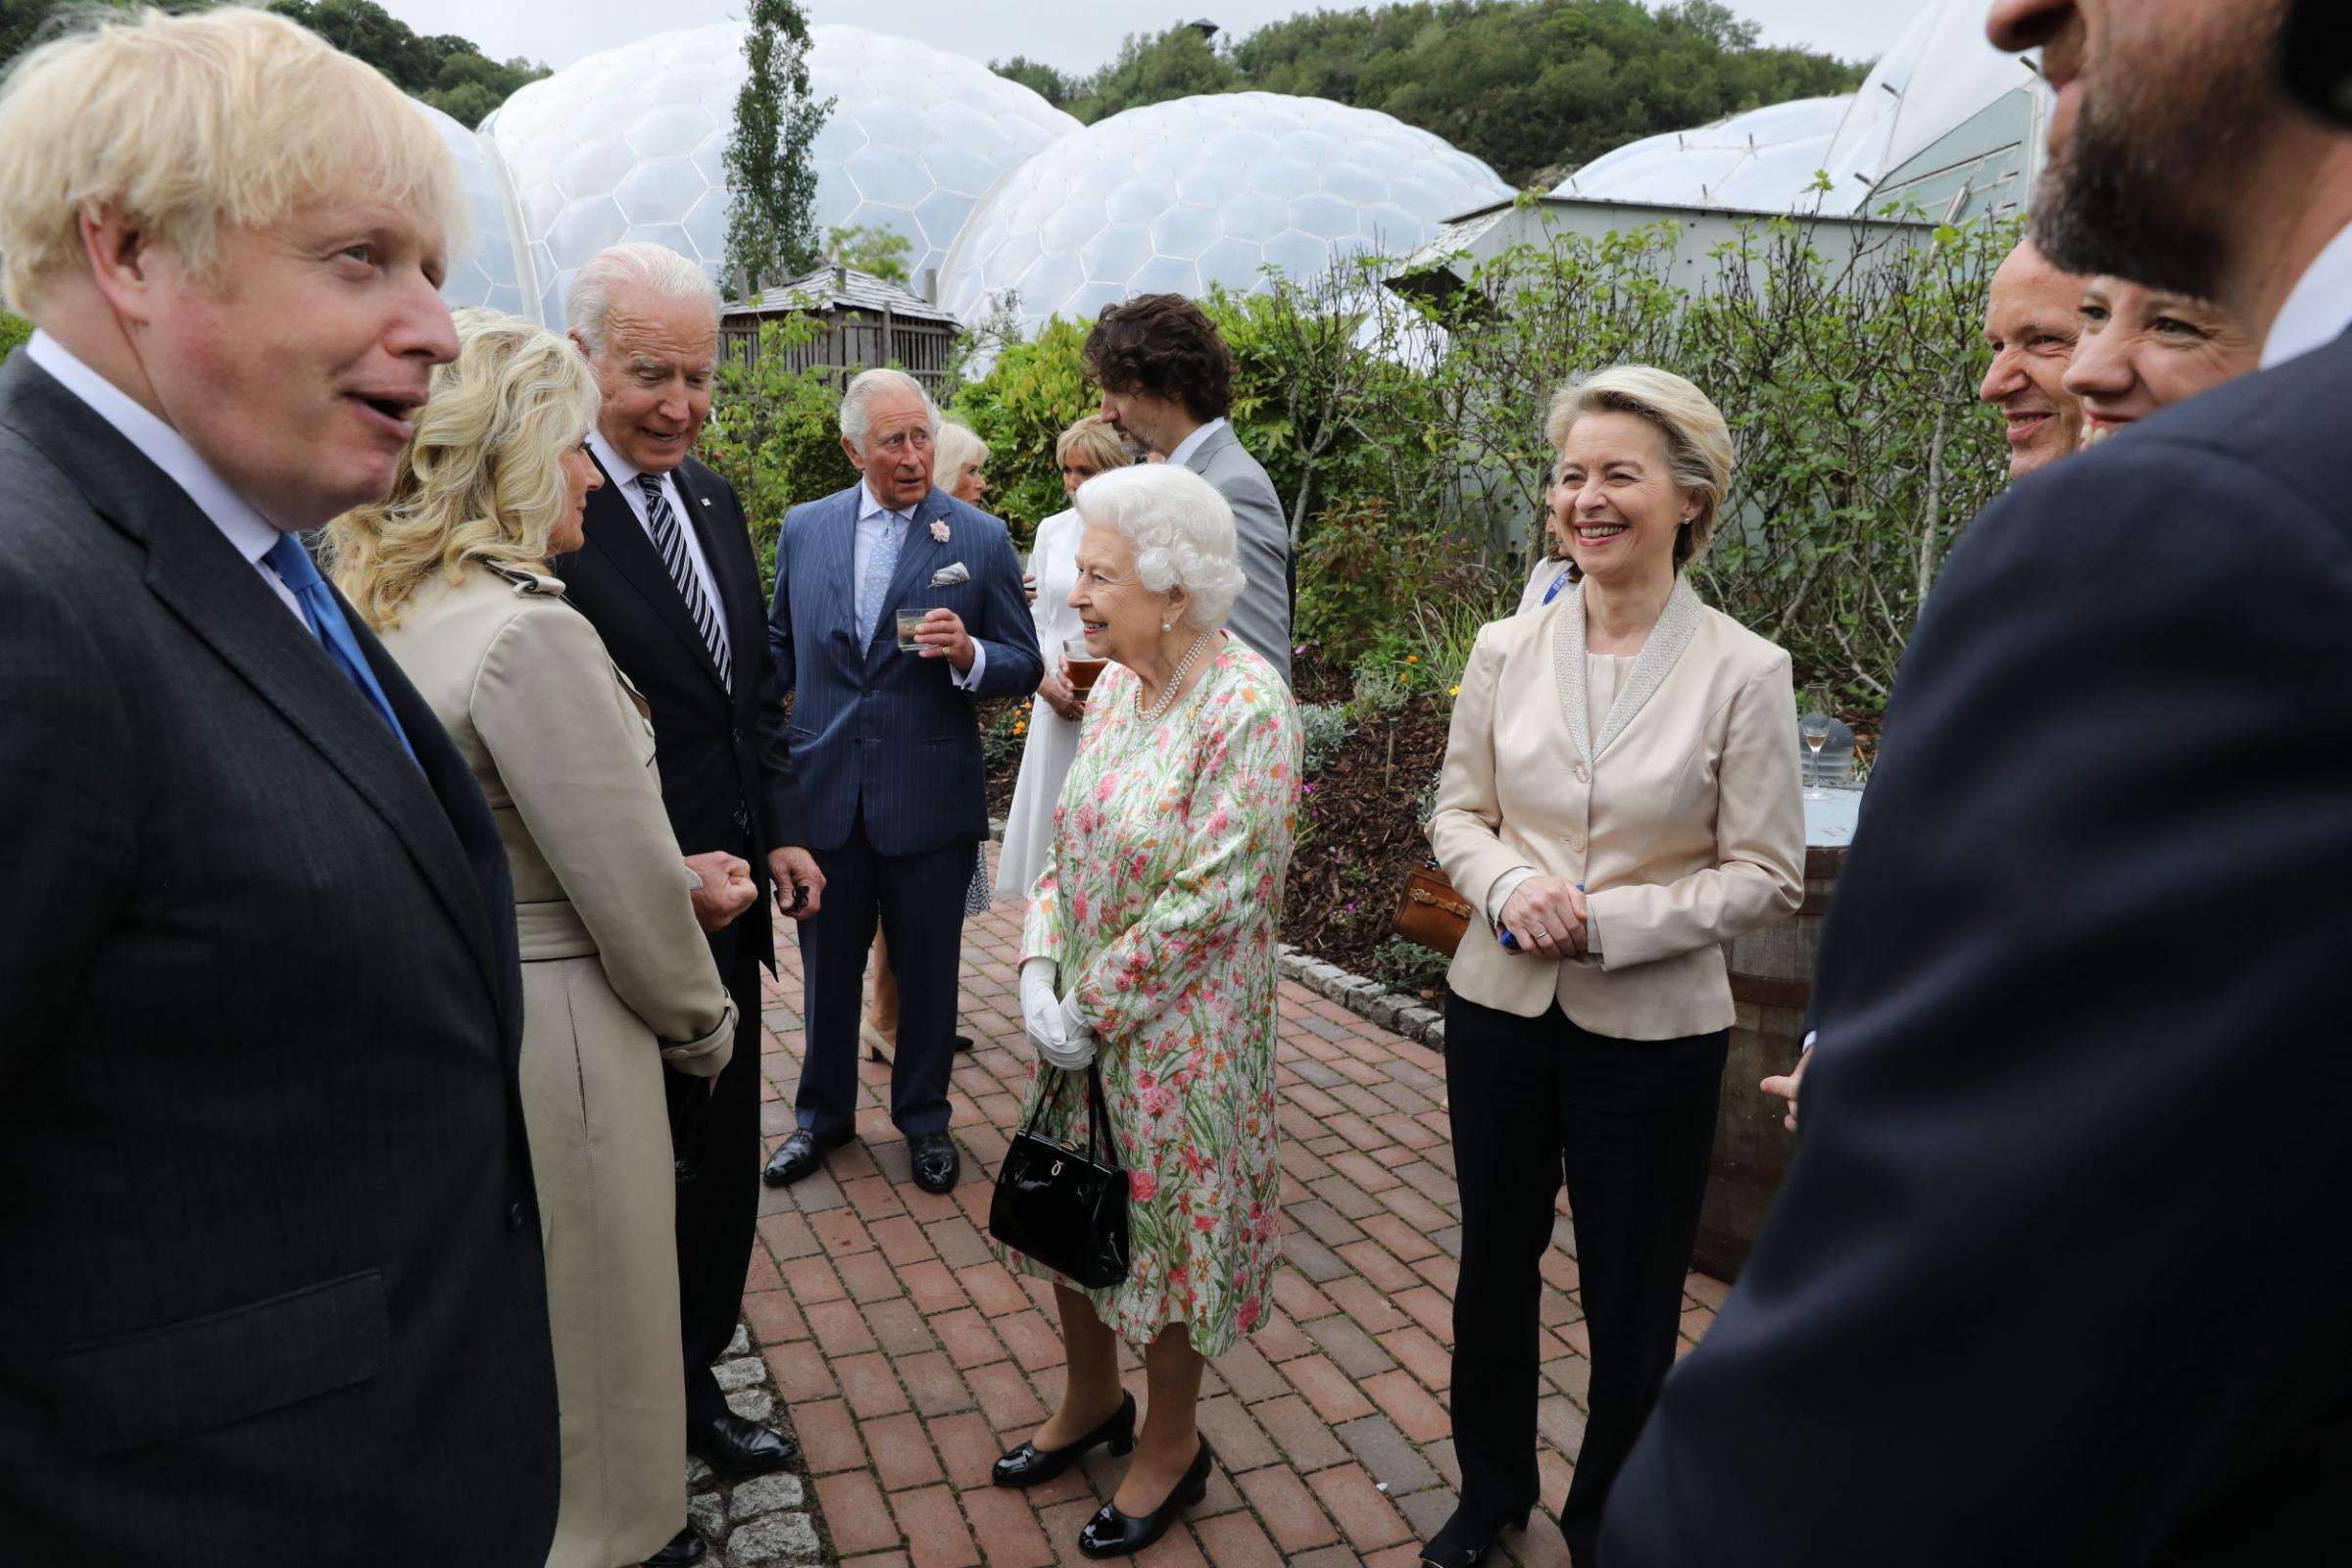 Queen Elizabeth II speaks to US President Joe Biden and his wife Jill as she attends a reception at the Eden Project with Prime Minister Boris Johnson and G7 leaders, Picture: Jack Hill/The Times/PA Wire